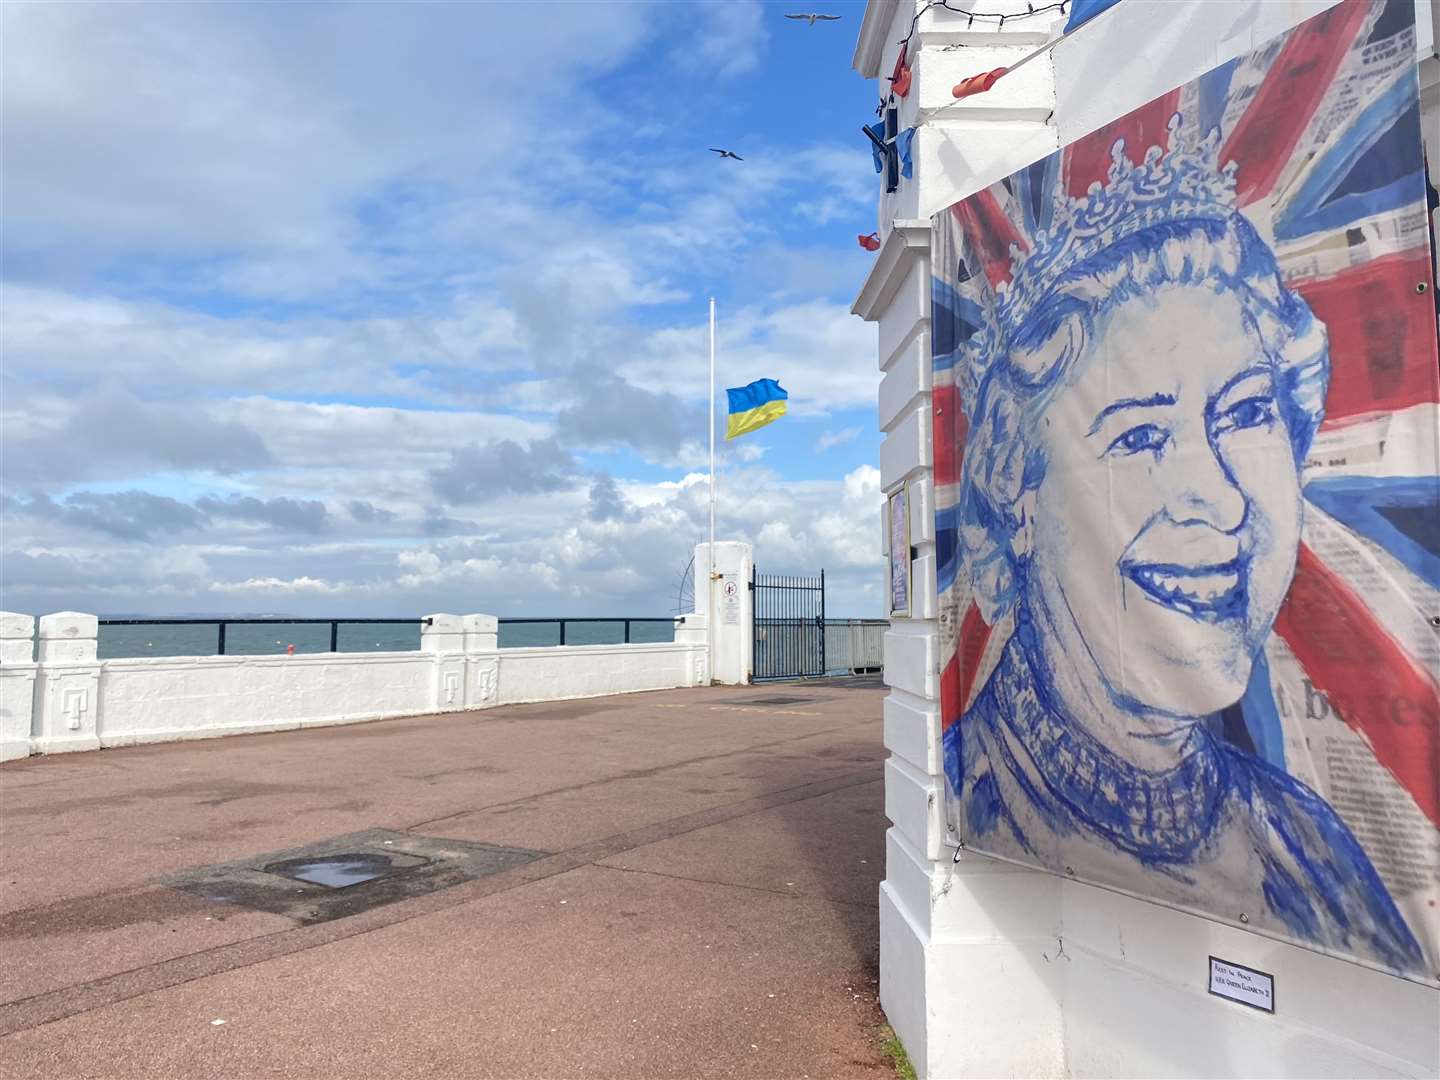 Residents across the county are paying tribute to the Queen